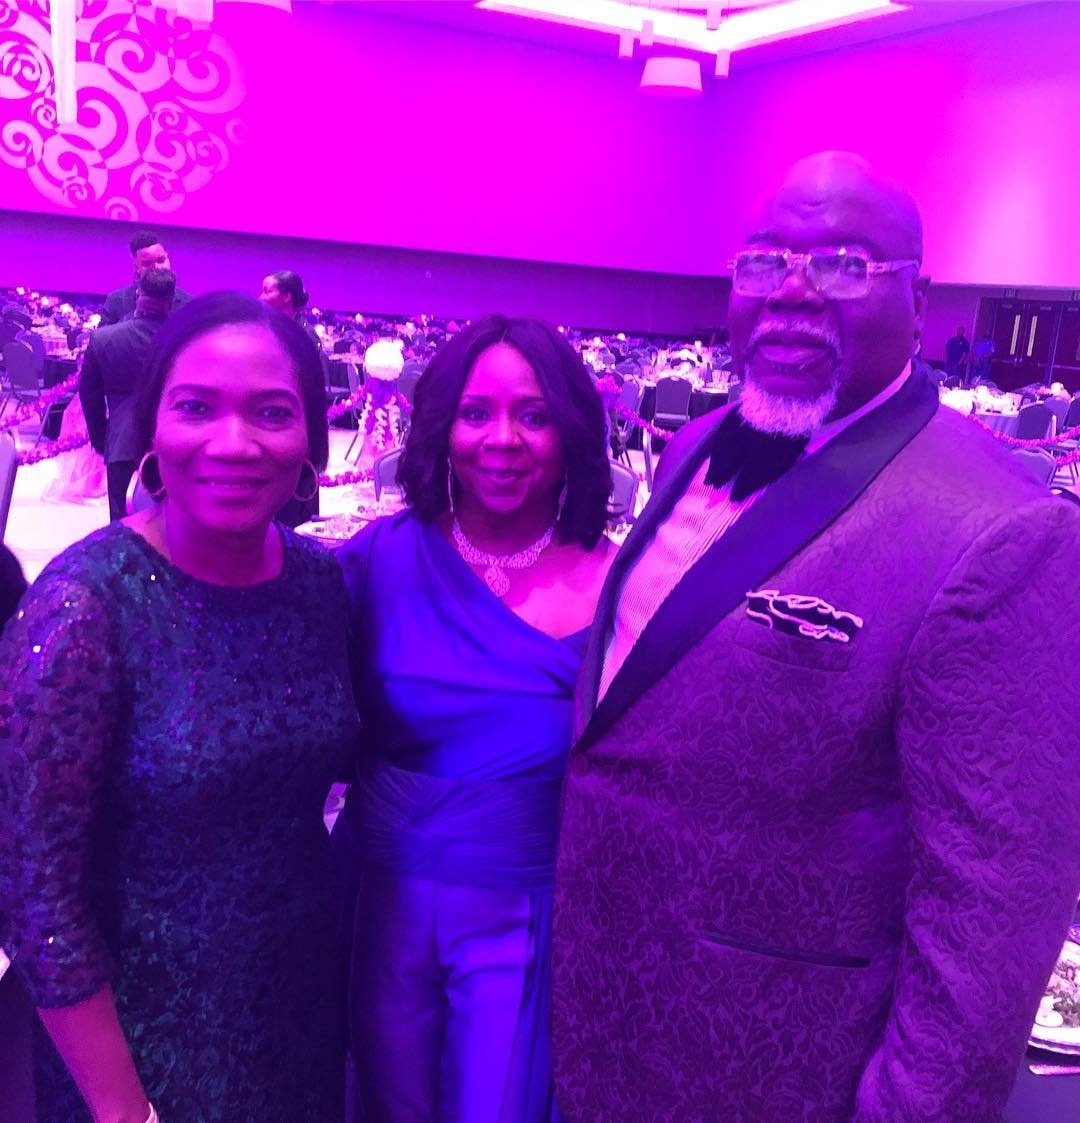 SO HONORED TO BE A GUEST AT POTTERS HOUSE DALLAS LASTNITE (WTAL MASTERCLASS GALA NITE 2018) WT THE ERUDITE PREACHER @bishopjakes & THE DELECTABLE MATRIARCH; FIRST LADY @seritajakes. WHAT A BLESSING!! 👌🎷💃IT DOESN'T MATTER WHAT THE MATTER IS WE ALL SHALL MATTER WHERE IT MATTERS